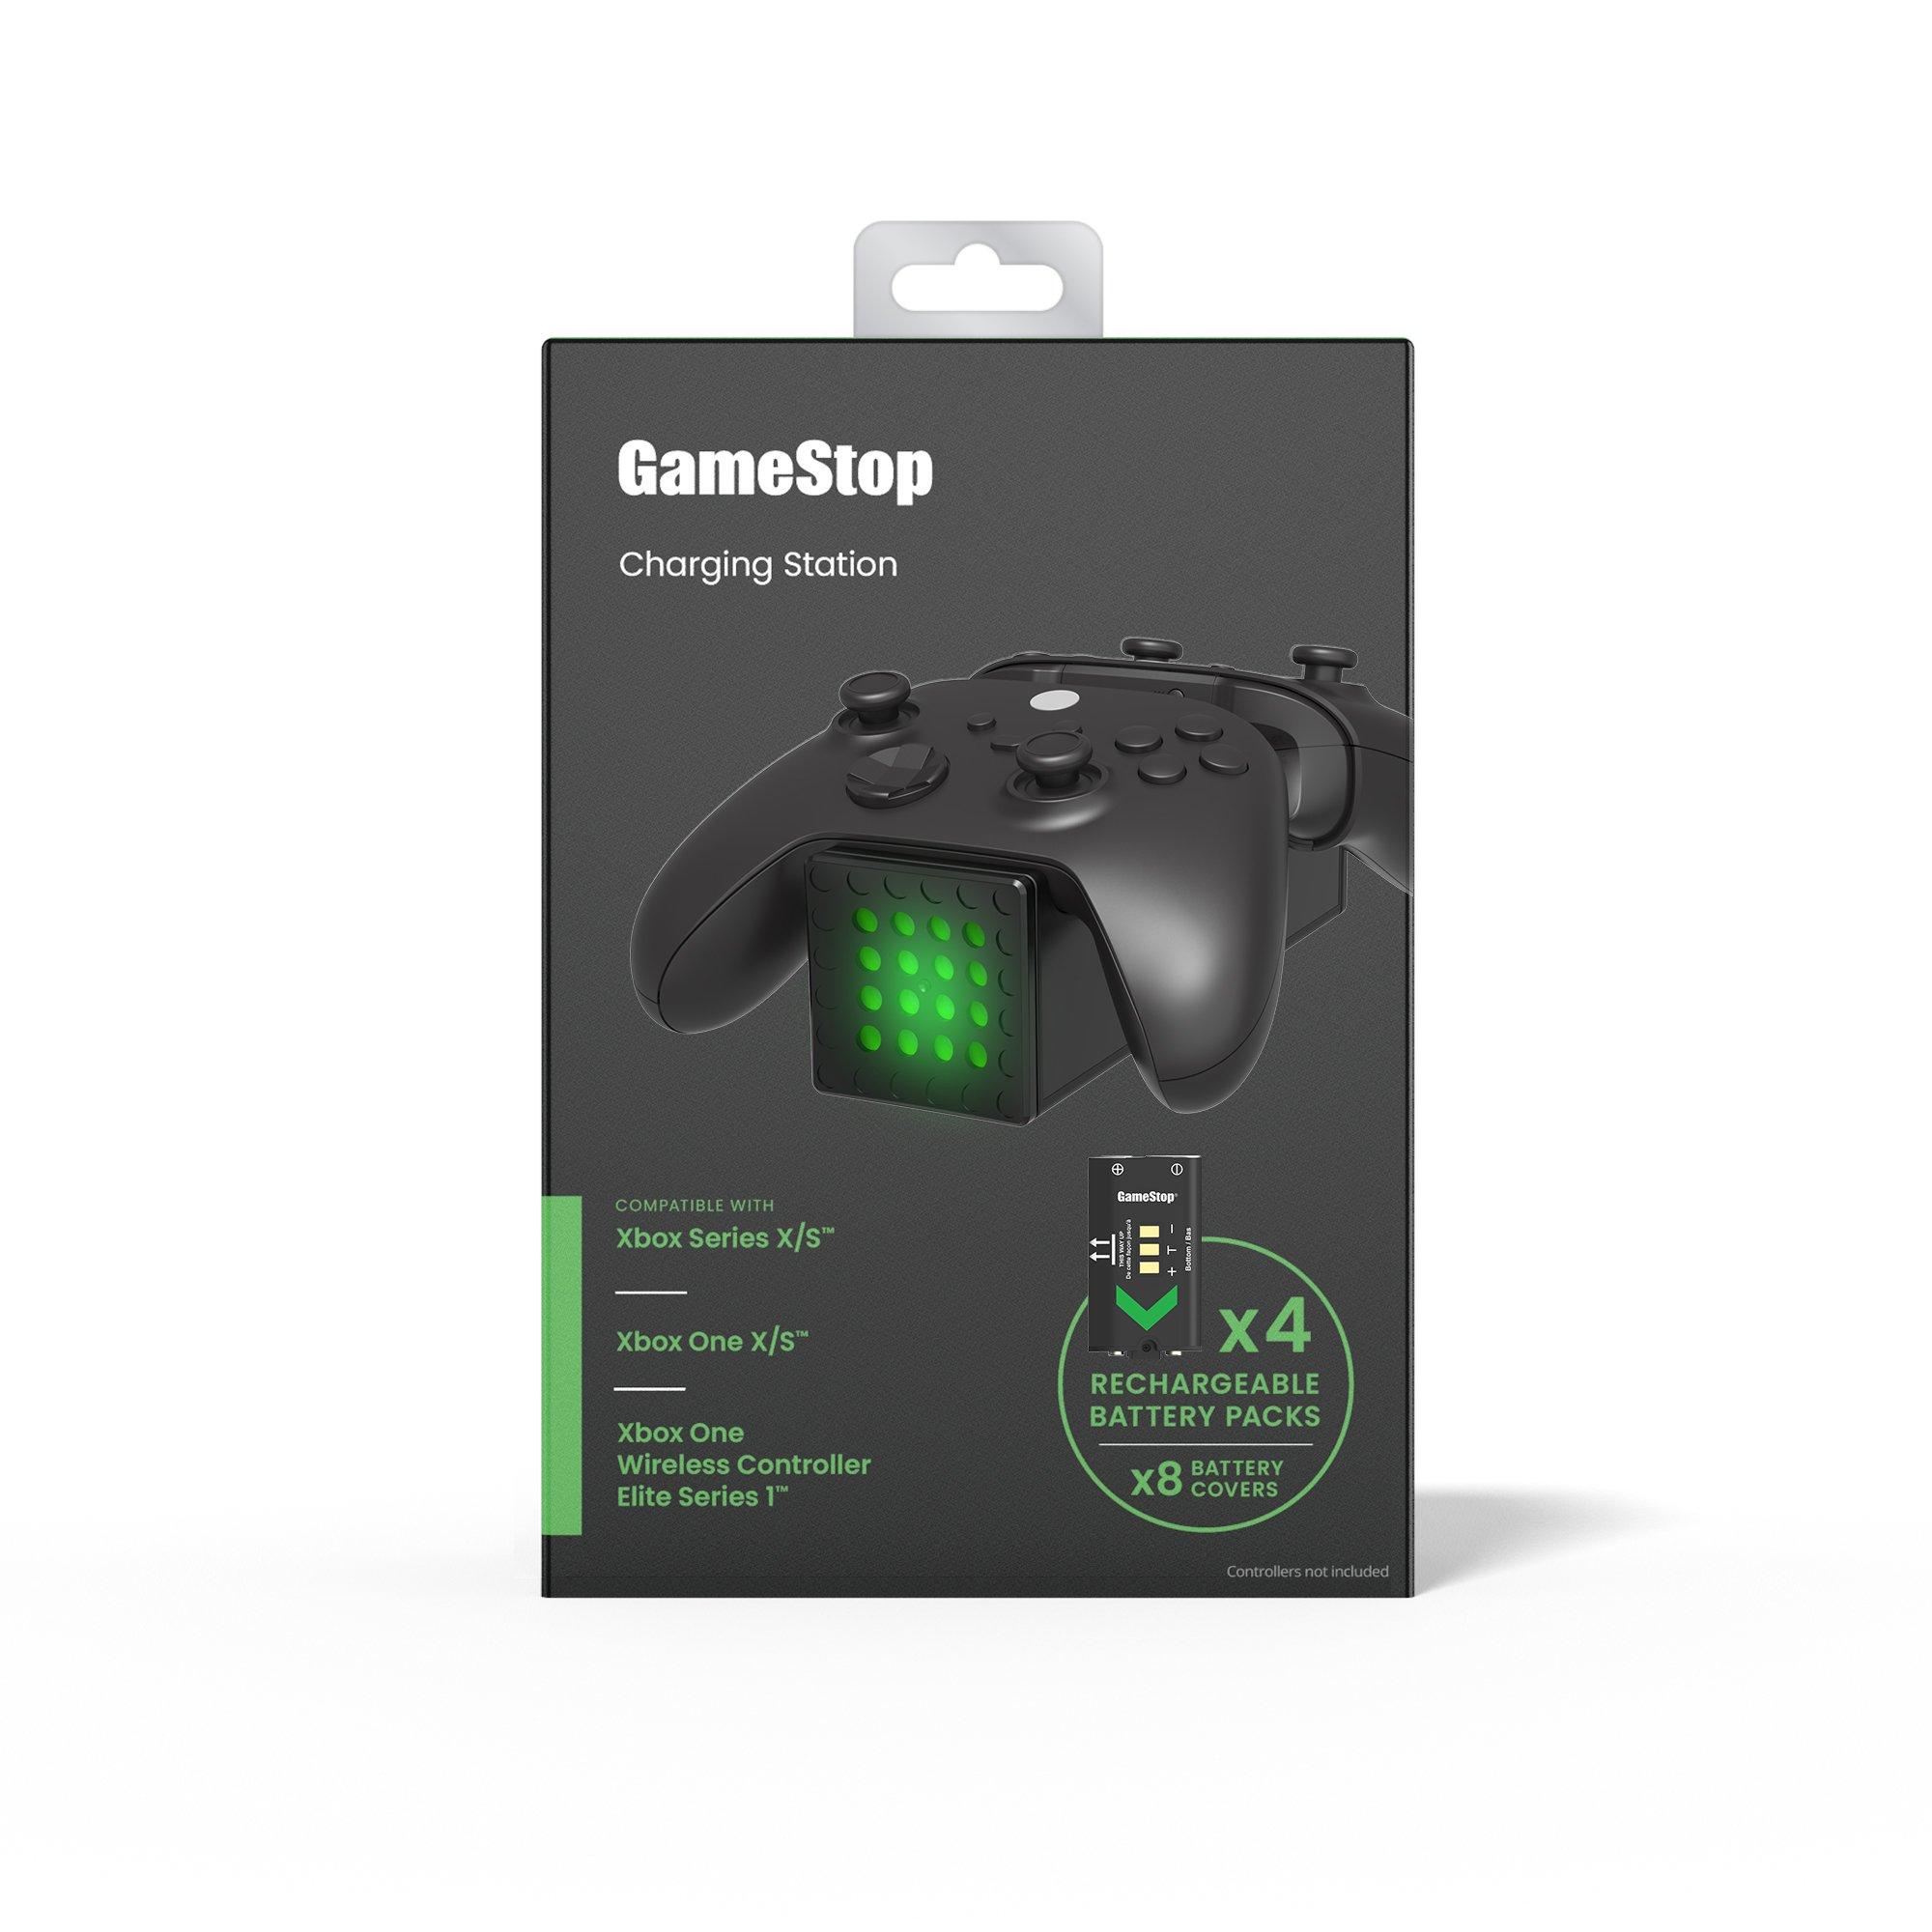 GameFitz 10-In-1 Gaming Accessories Kit For Xbox Series S & X